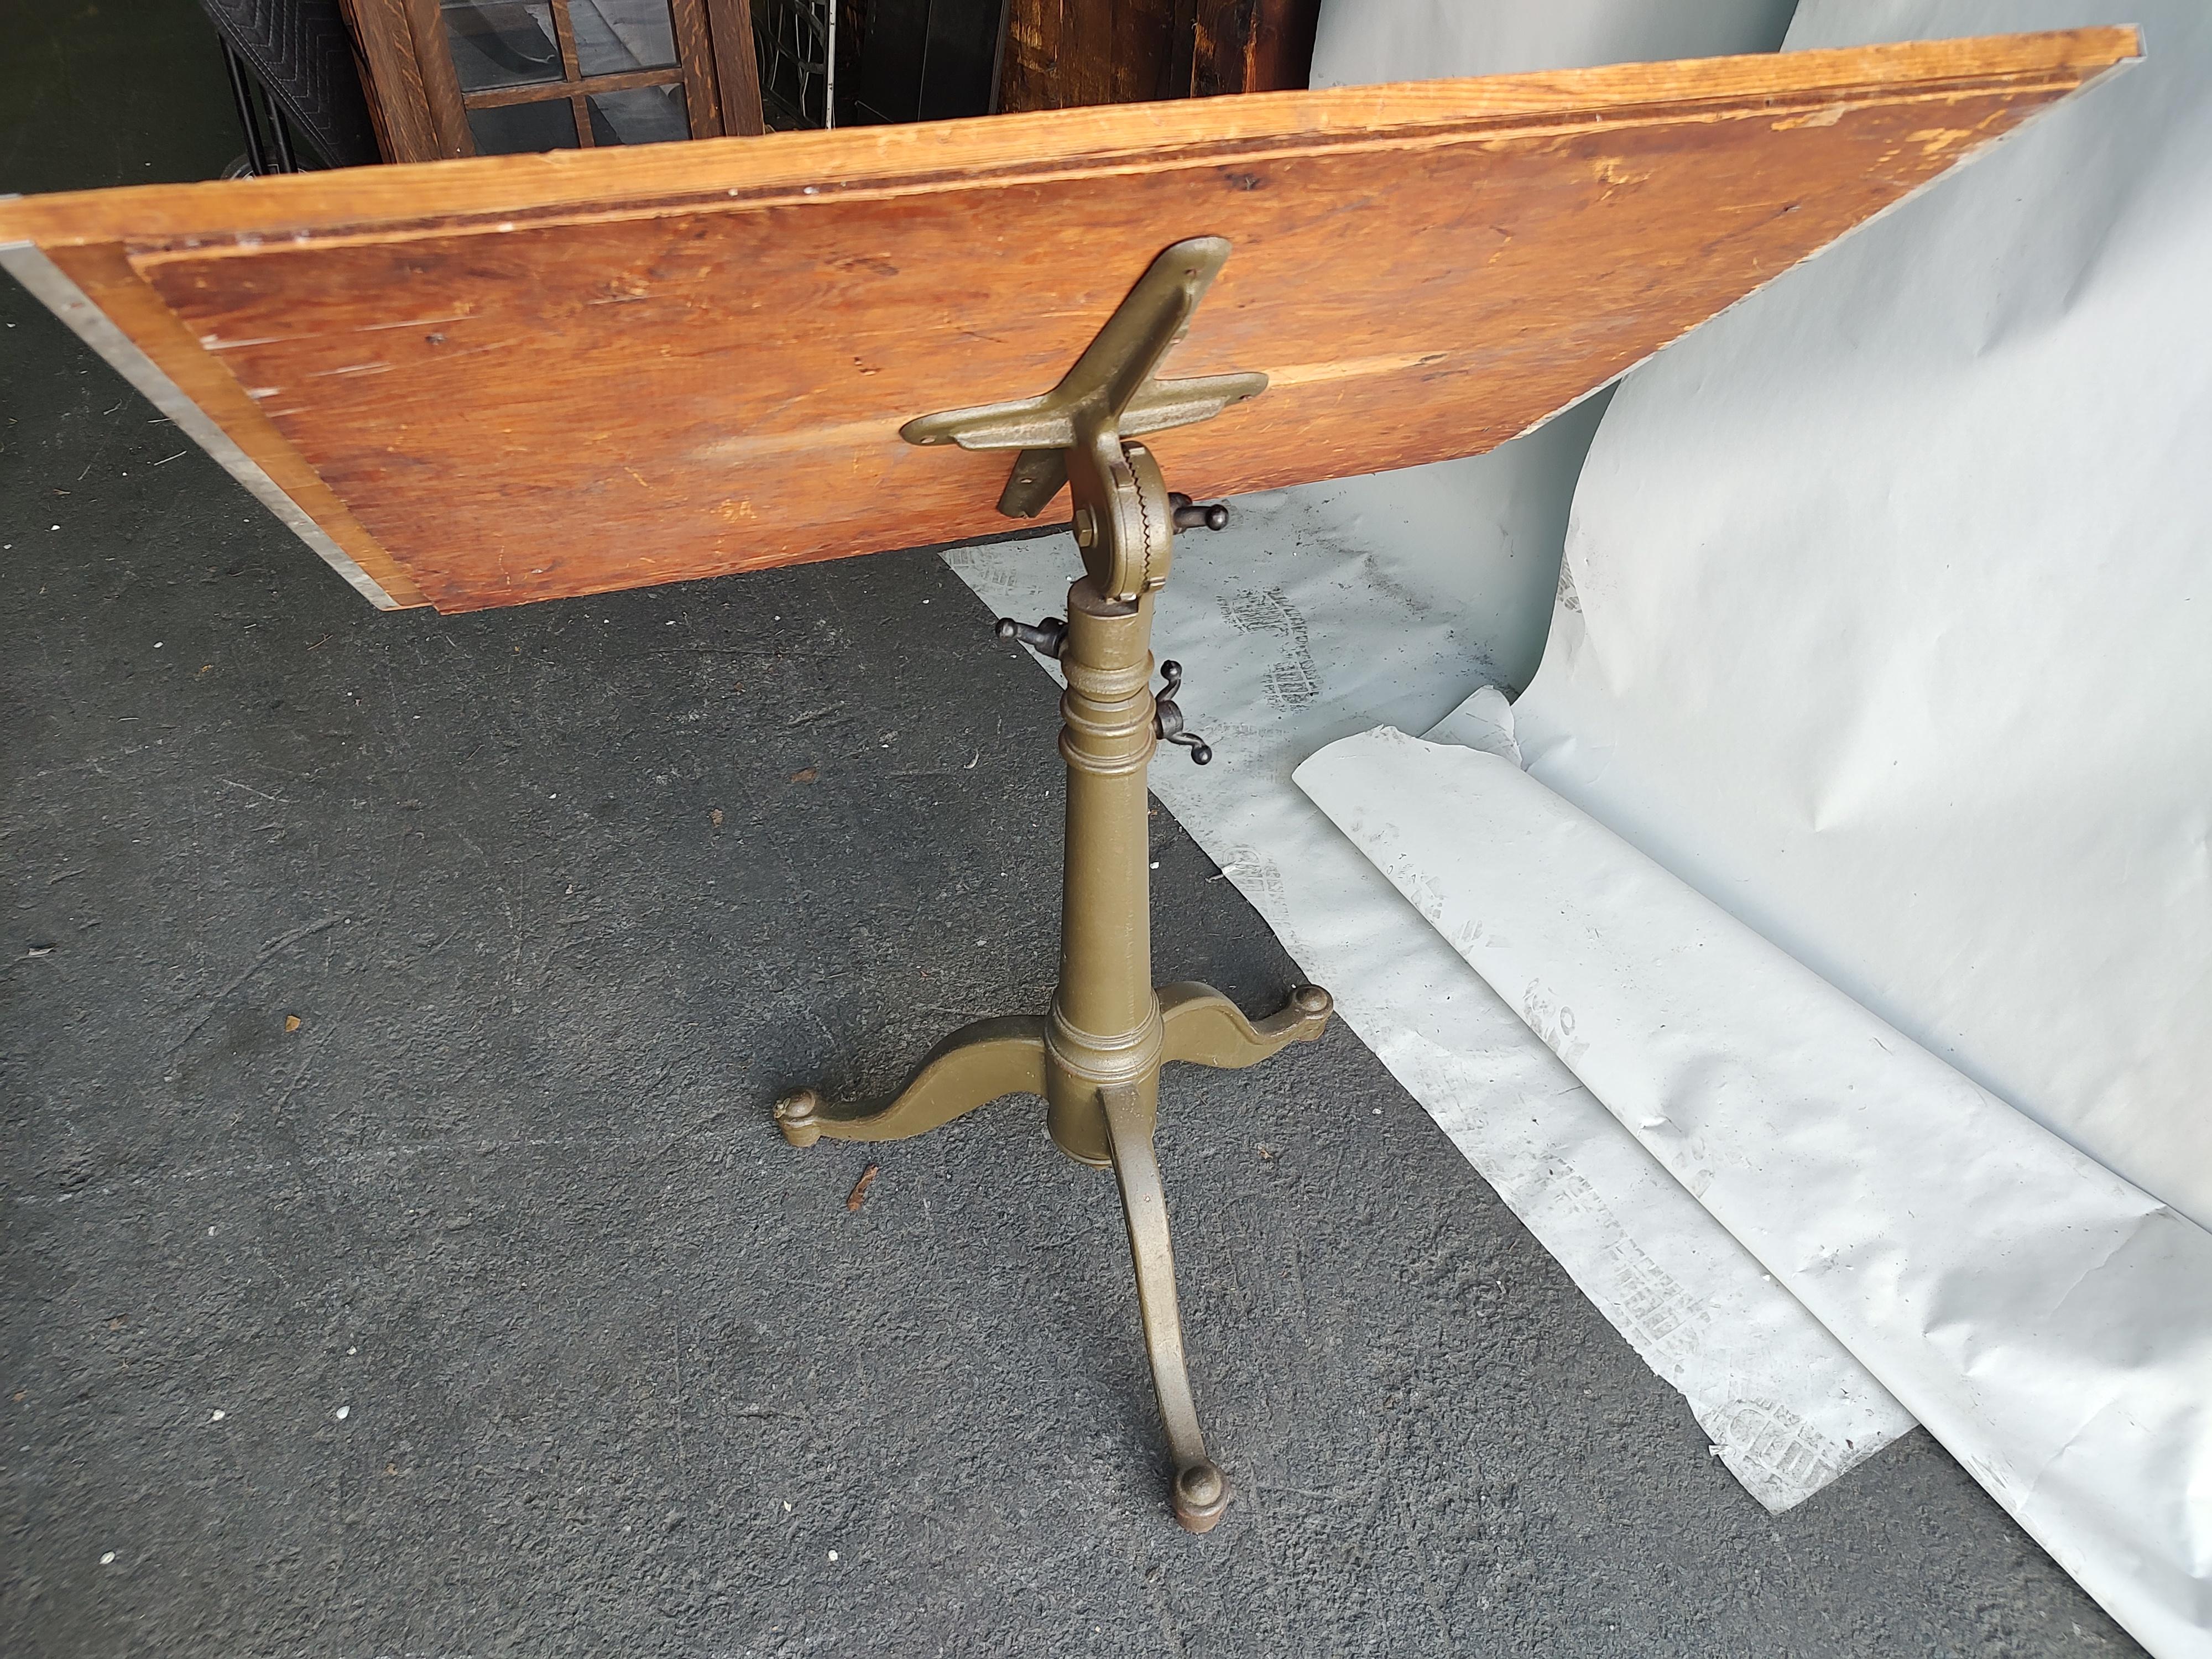 Amazing cast iron fully adjustable drafting table with a extreme height of 53 from a low of 39.5. In a original paint finish of army green with black cast iron adjustment knobs. Wood top which shows wear and is 36 x 24.25. Excellent vintage antique